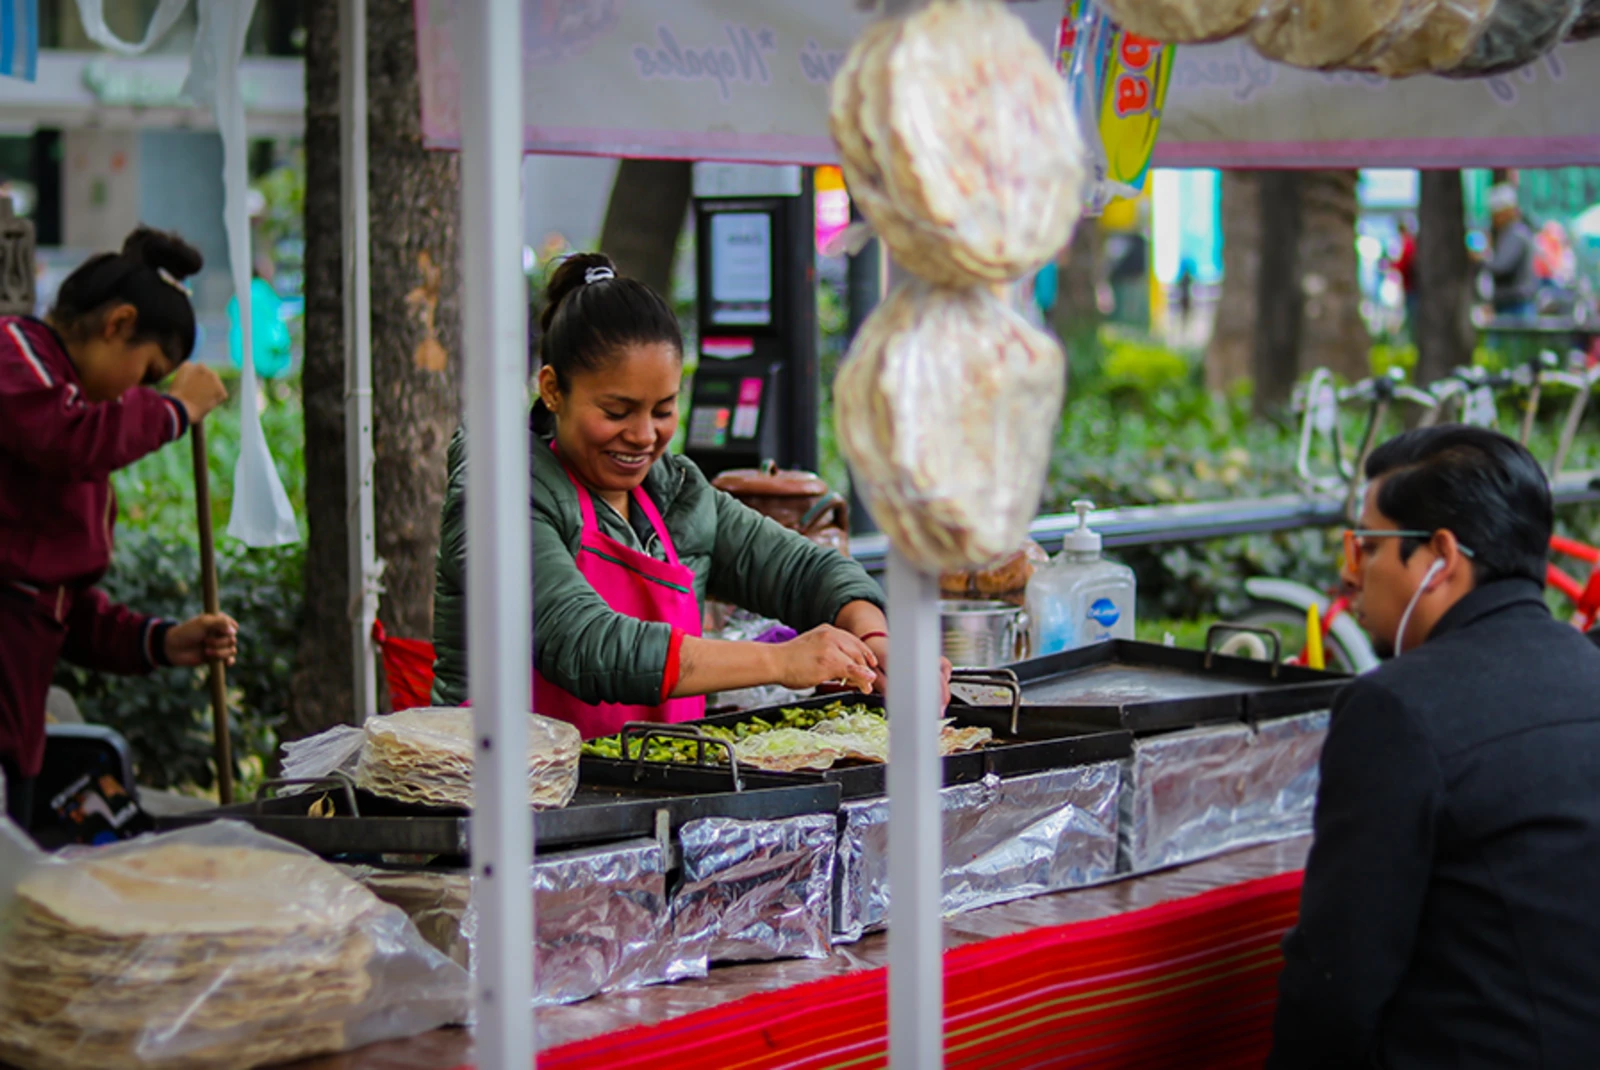 Local Vegetarian Food, Art History & Culture Guide in Mexico City - Places to eat & drink